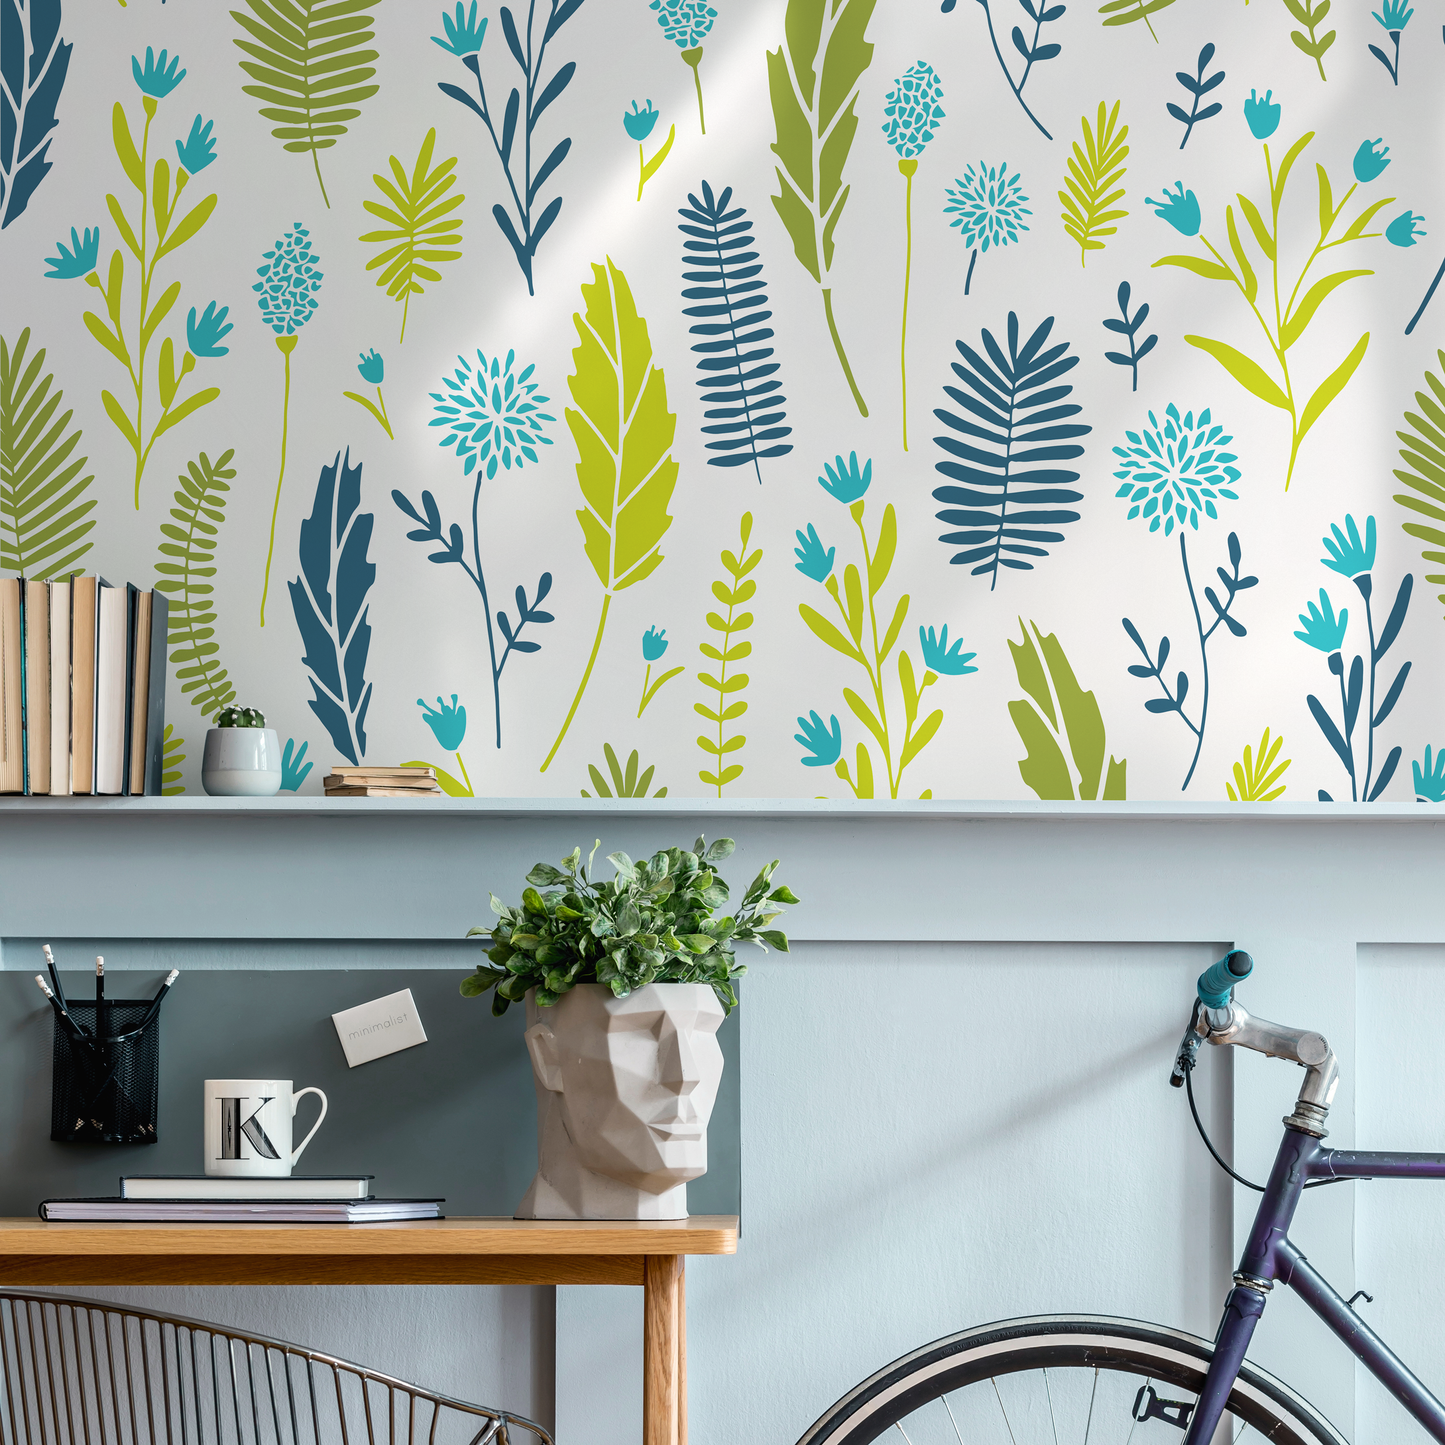 Wallpaper Removable Wallpaper Peel and Stick Wallpaper Wall Decor Home Decor  Wall Art Room Decor / Green and Blue Leaf Wallpaper - A879